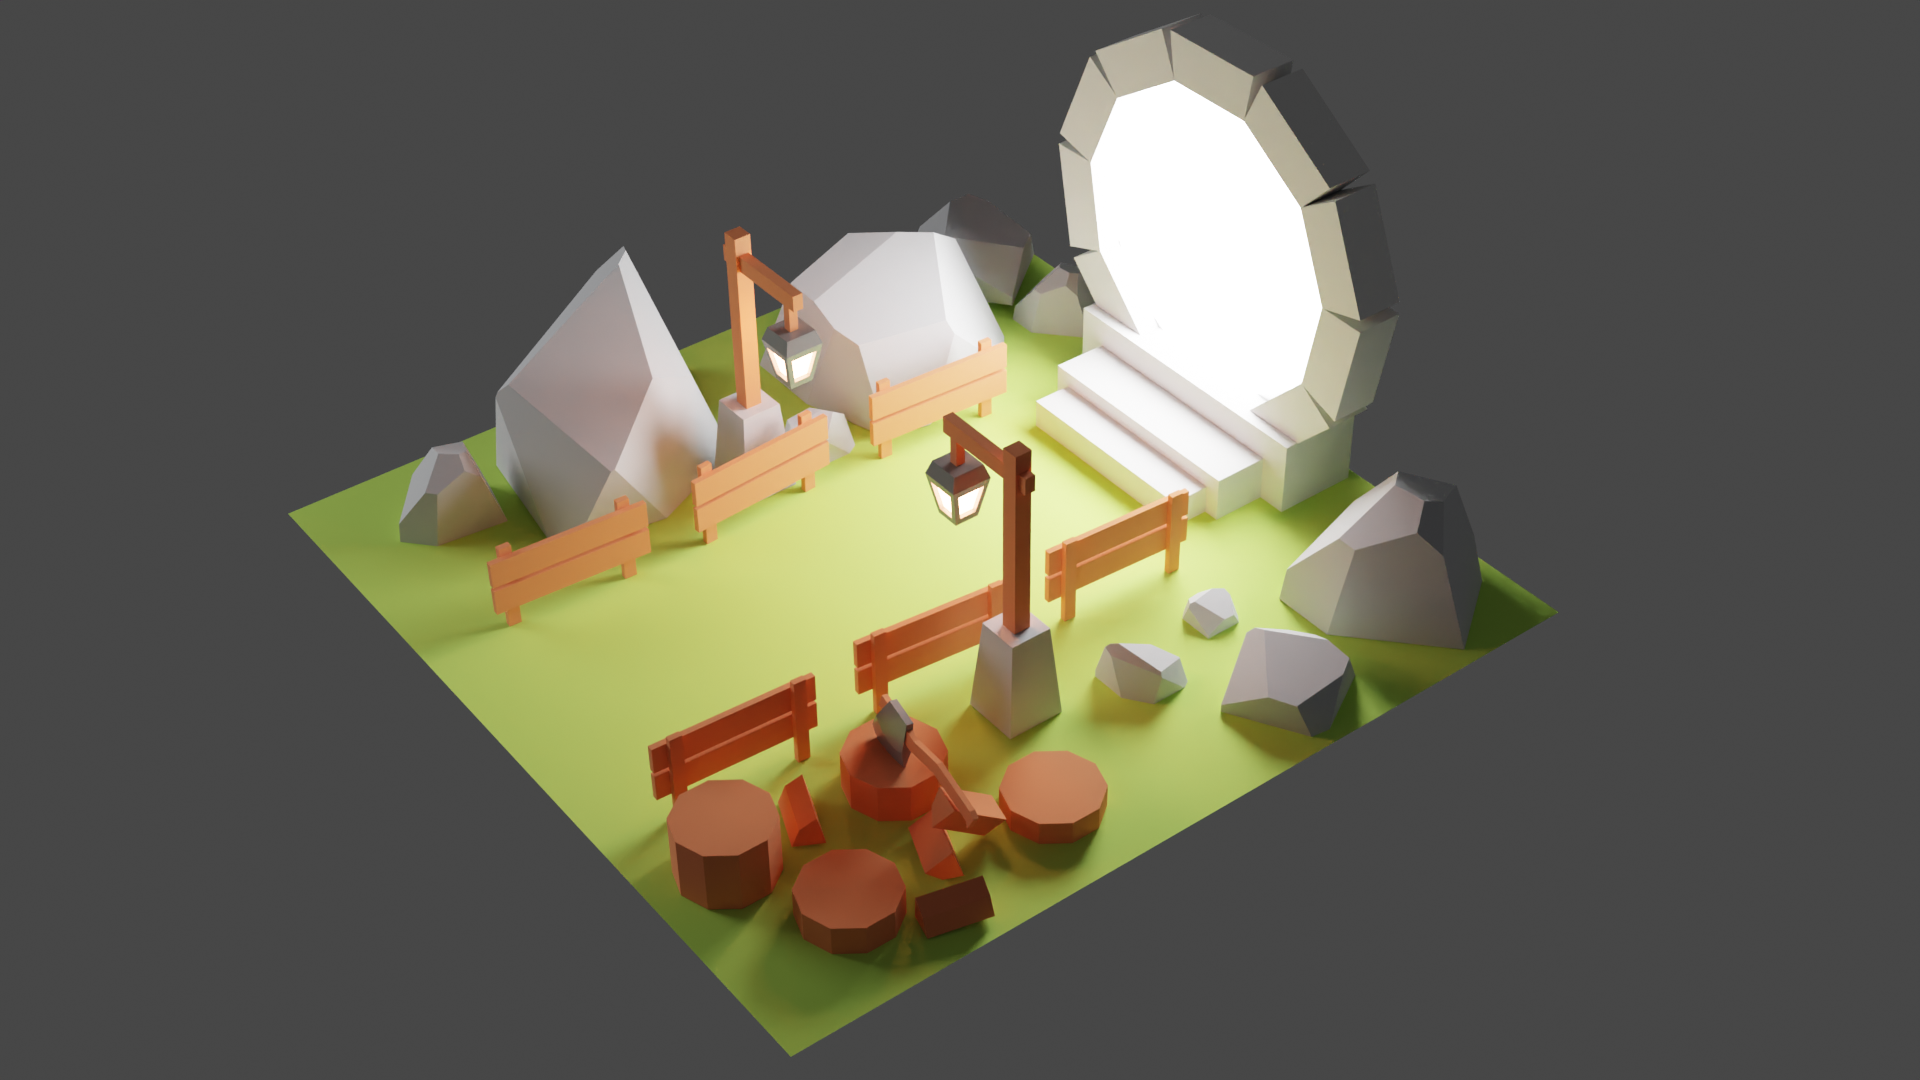 Blender model of a small grove with a portal